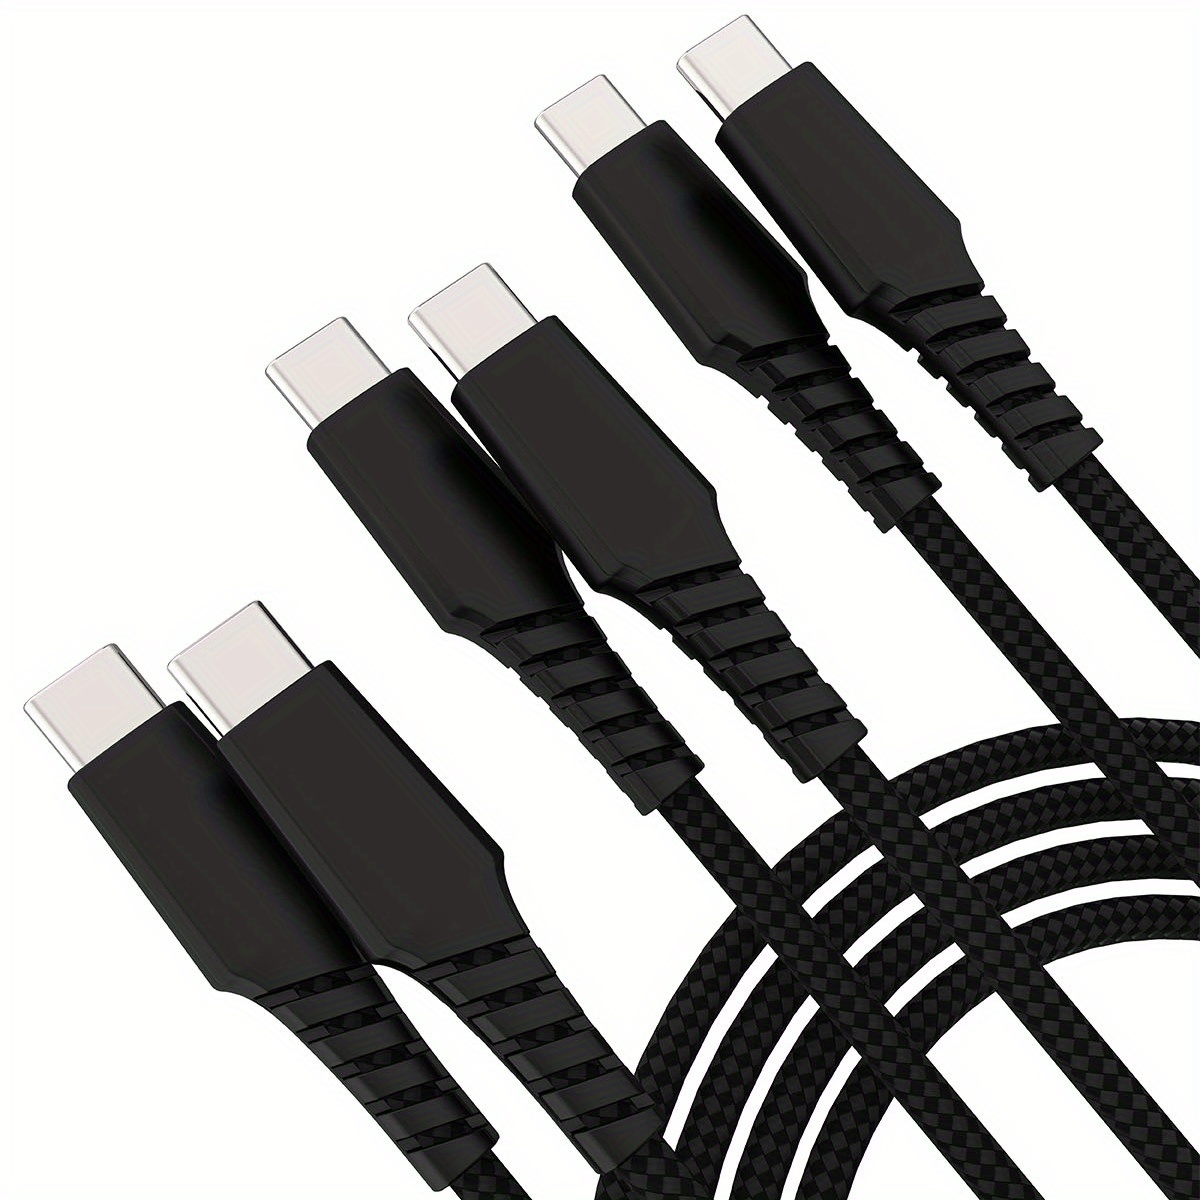 1m USB C Charging Cable Durable Cord 60W - USB-C Cables, Cables